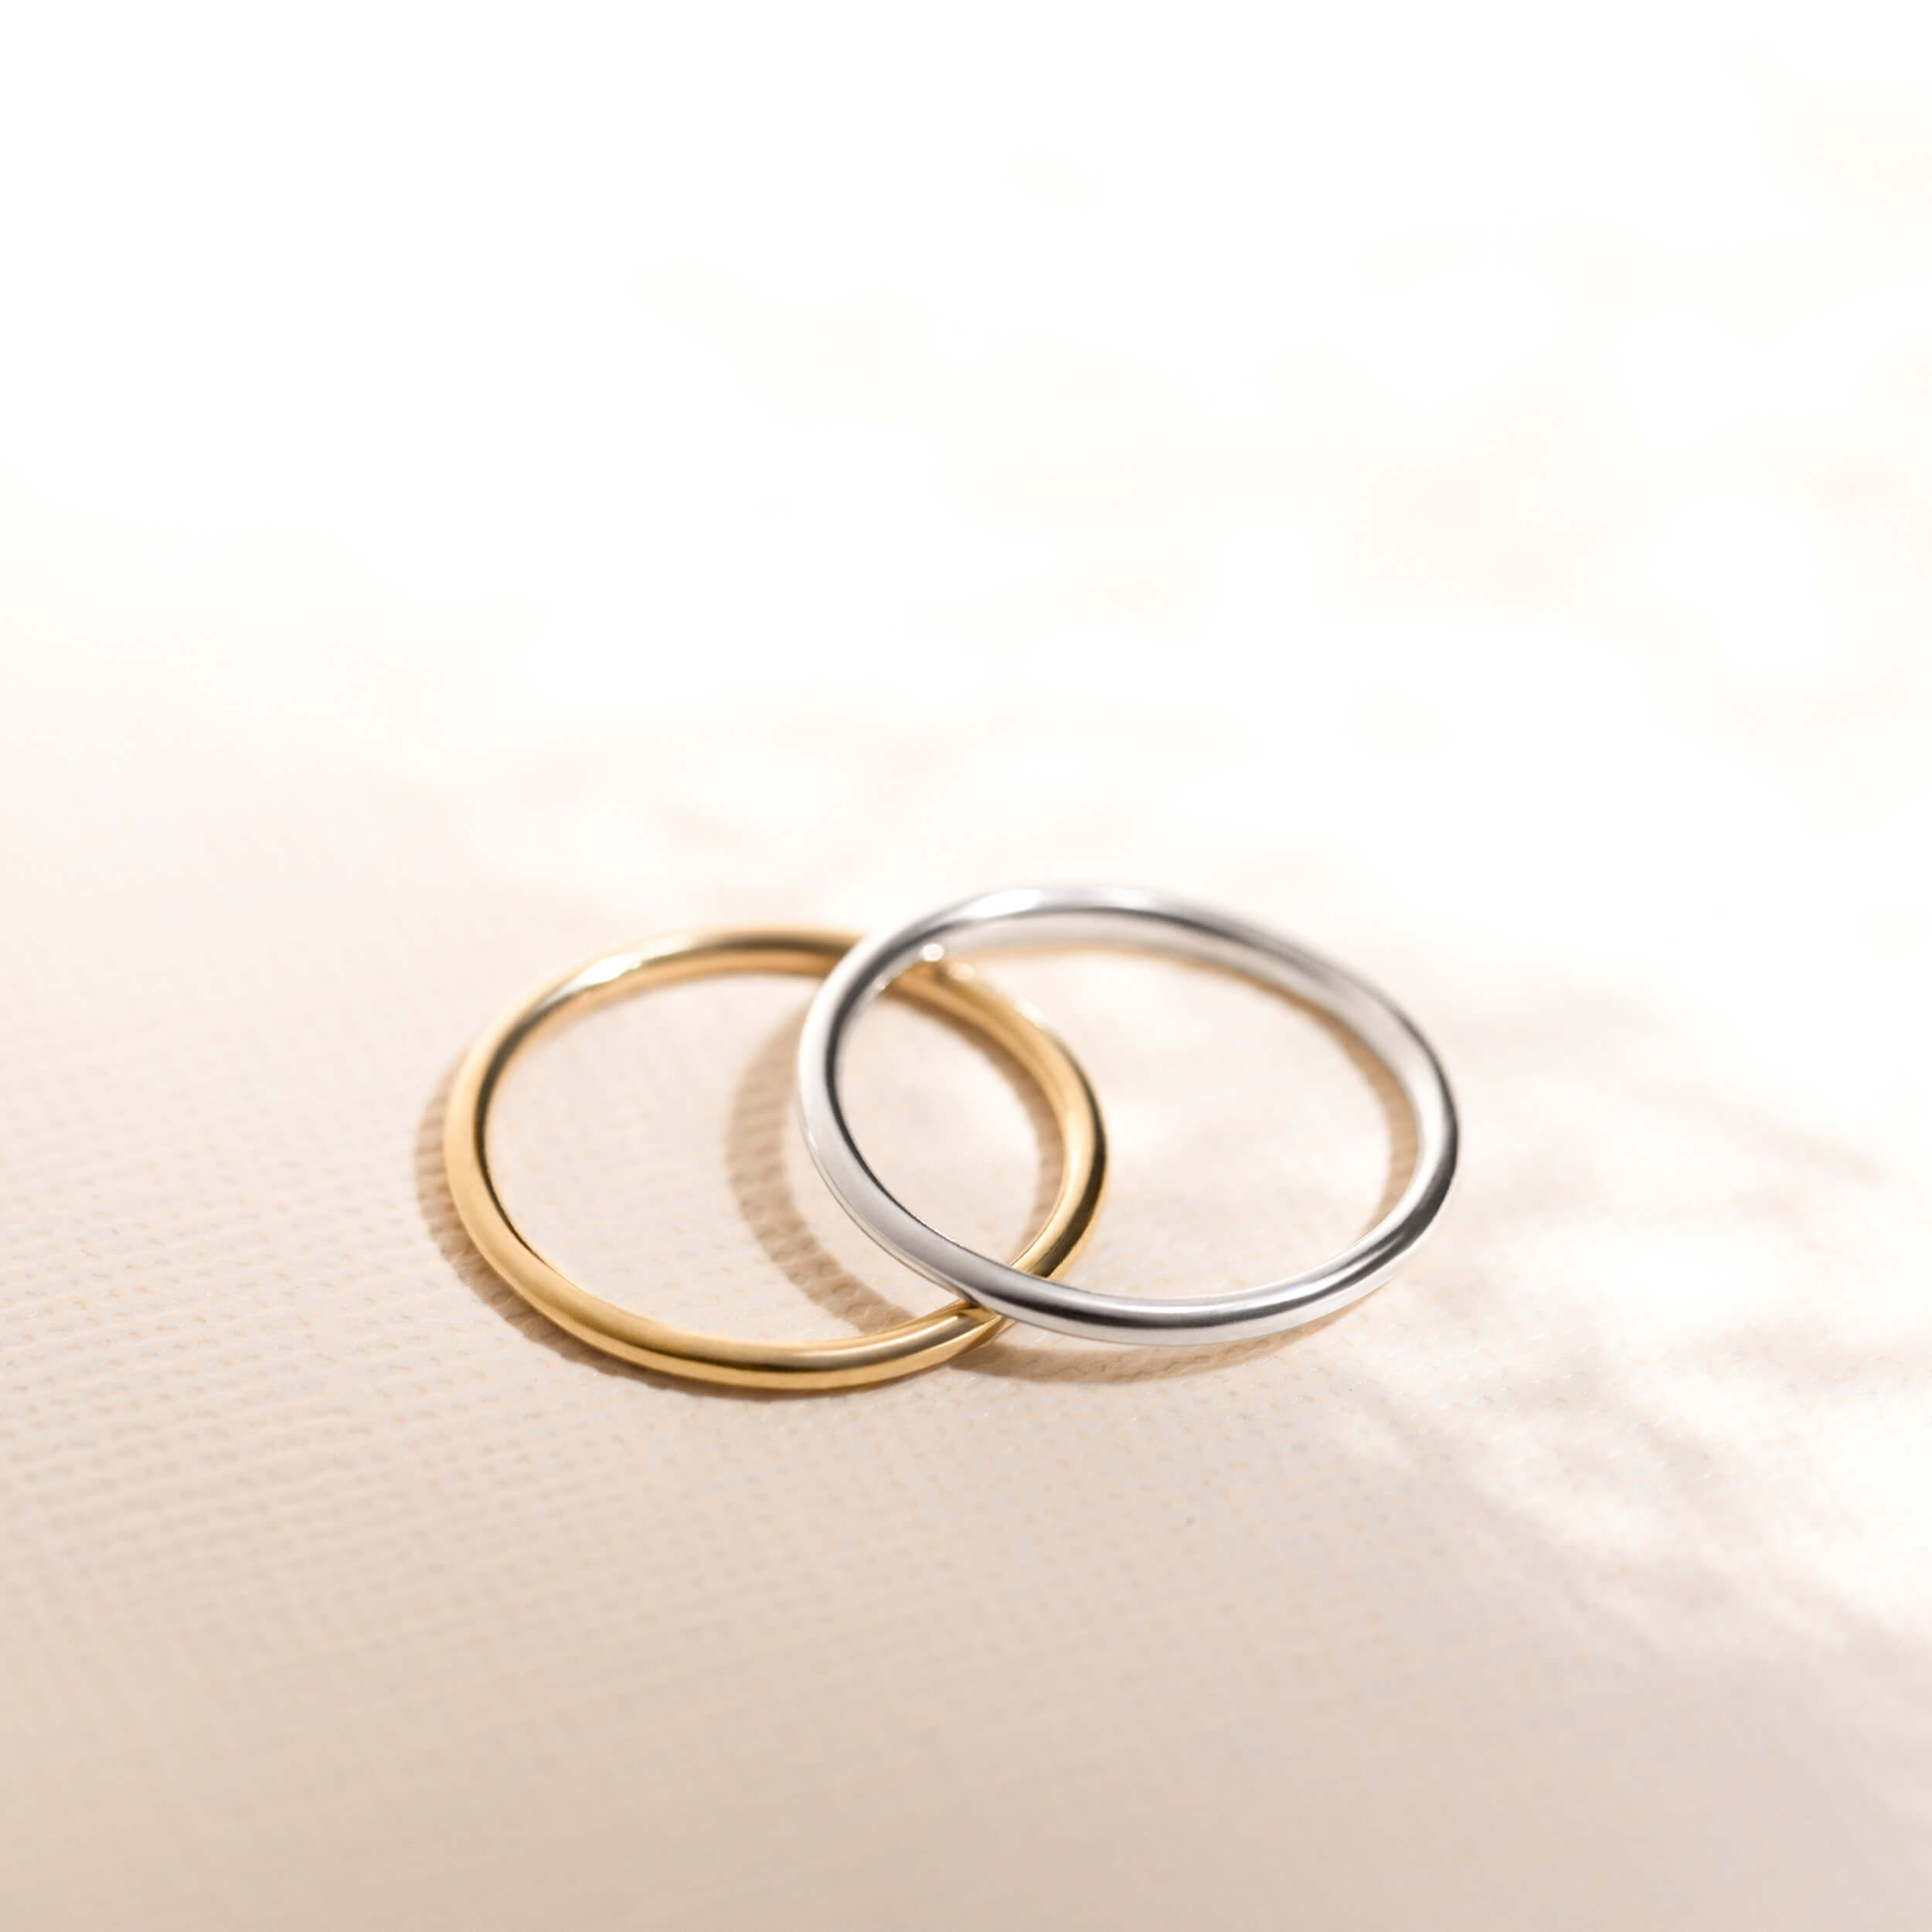 catherine ring, eleanor jewellery design, ejd, slim silver ring, slim gold band, handmade gold ring, manchester jewellery